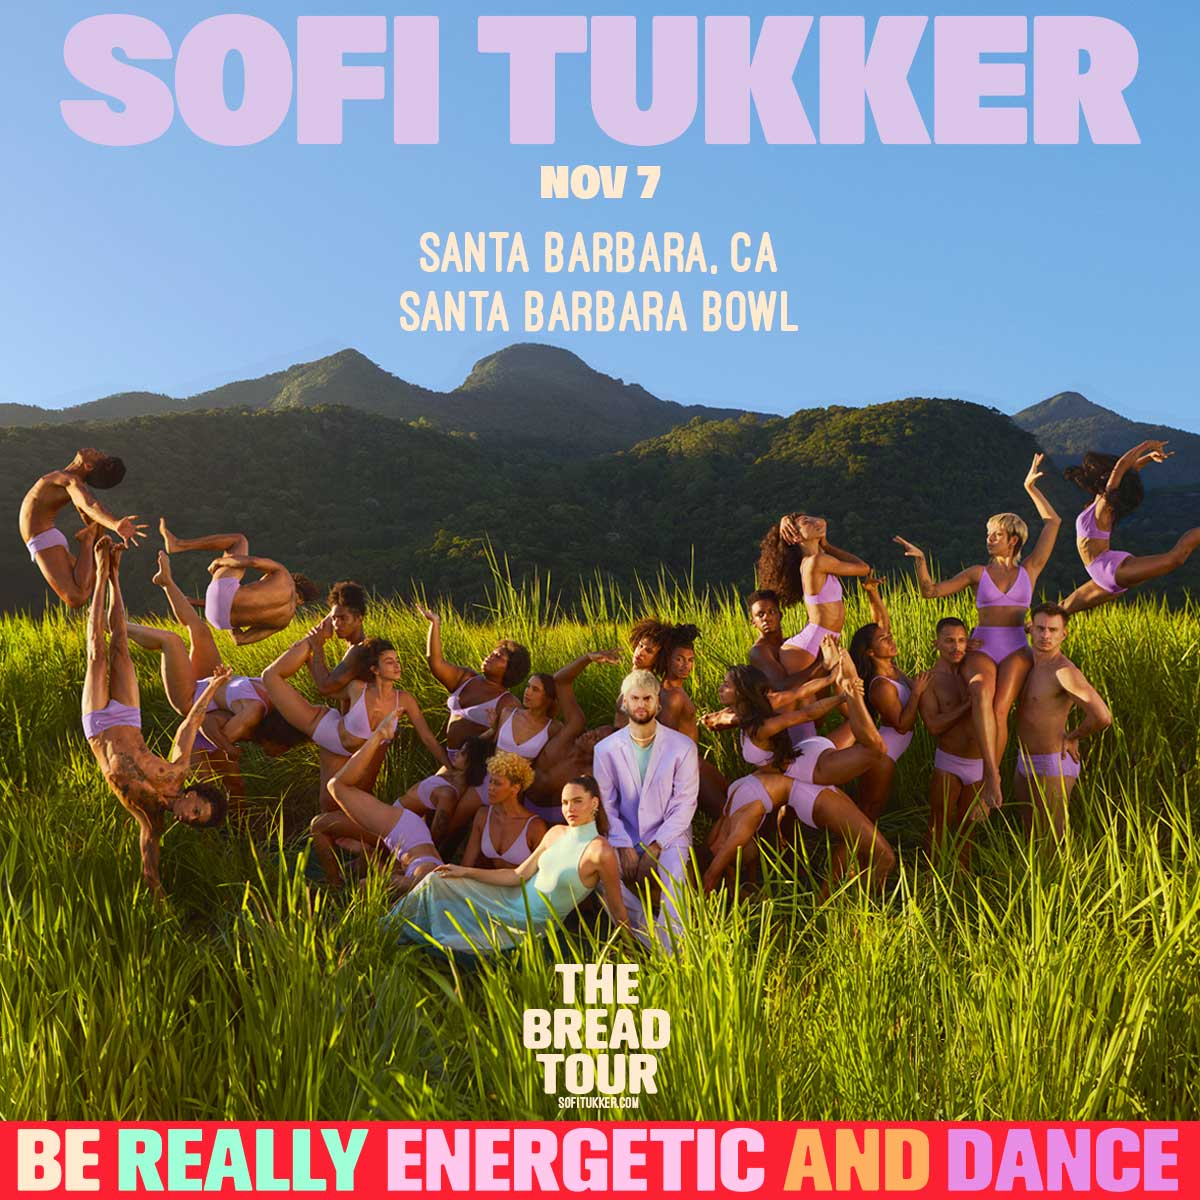 📣@SOFITUKKER ,'The BREAD Tour', brings that energetic vibe to @SBBowl on 11/07! 🎟️ Tix on sale: 5/10 @ 10 AM 🎟️ Get tix at the Bowl Box Office or: sbbowl.com 🎶Bowl news & info: sbbowl.com #SantaBarbaraBowl #SBBowl #SBBowlSeason2024 #SofiTuckker